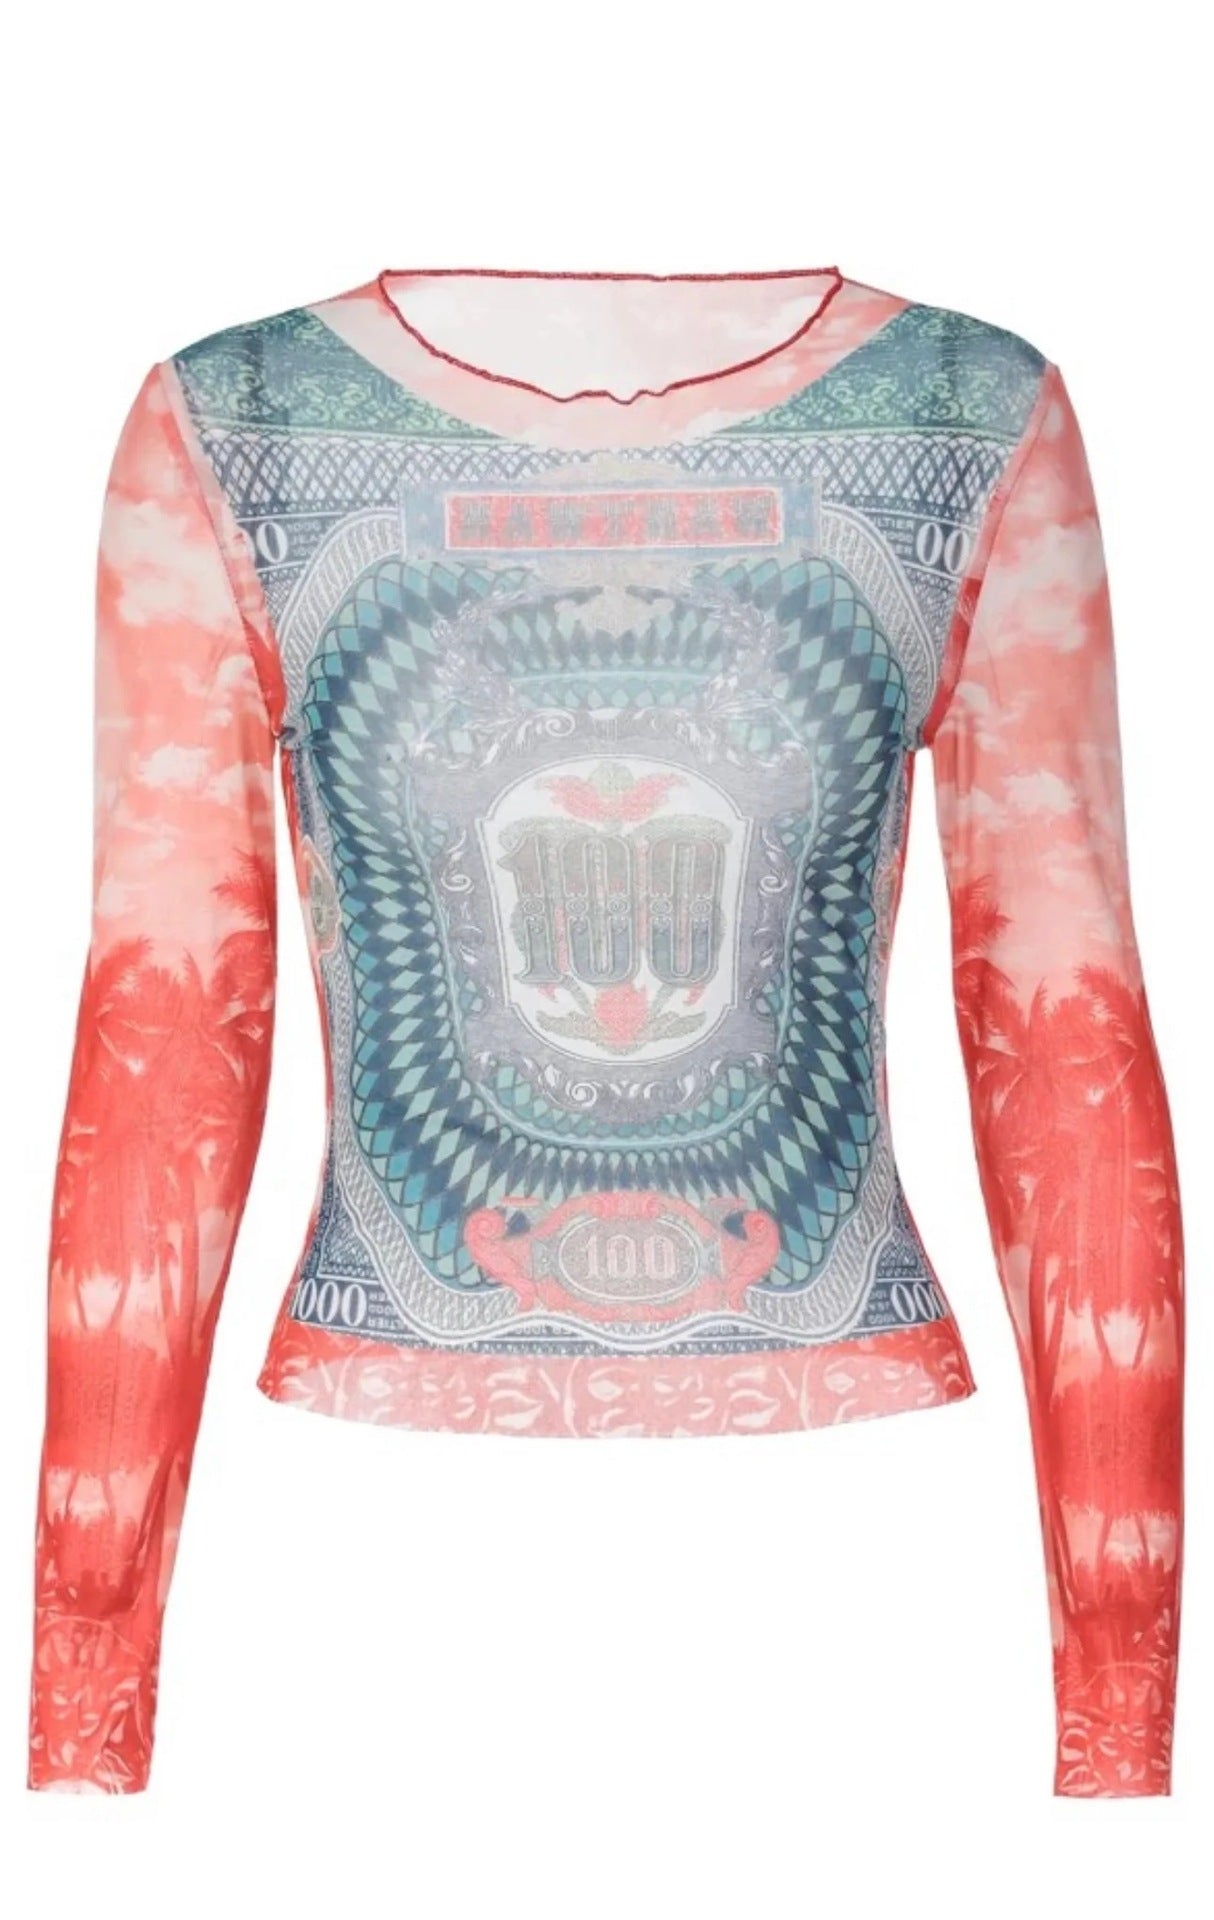 A Maramalive™ Fashion Digital Printing Colorful Breathable Women's Round Neck Pullover featuring a 3D effect with a dollar bill design, red, white, and blue colors, and palm tree motifs. Perfect for an edgy European and American style or the trendy street hipster look.